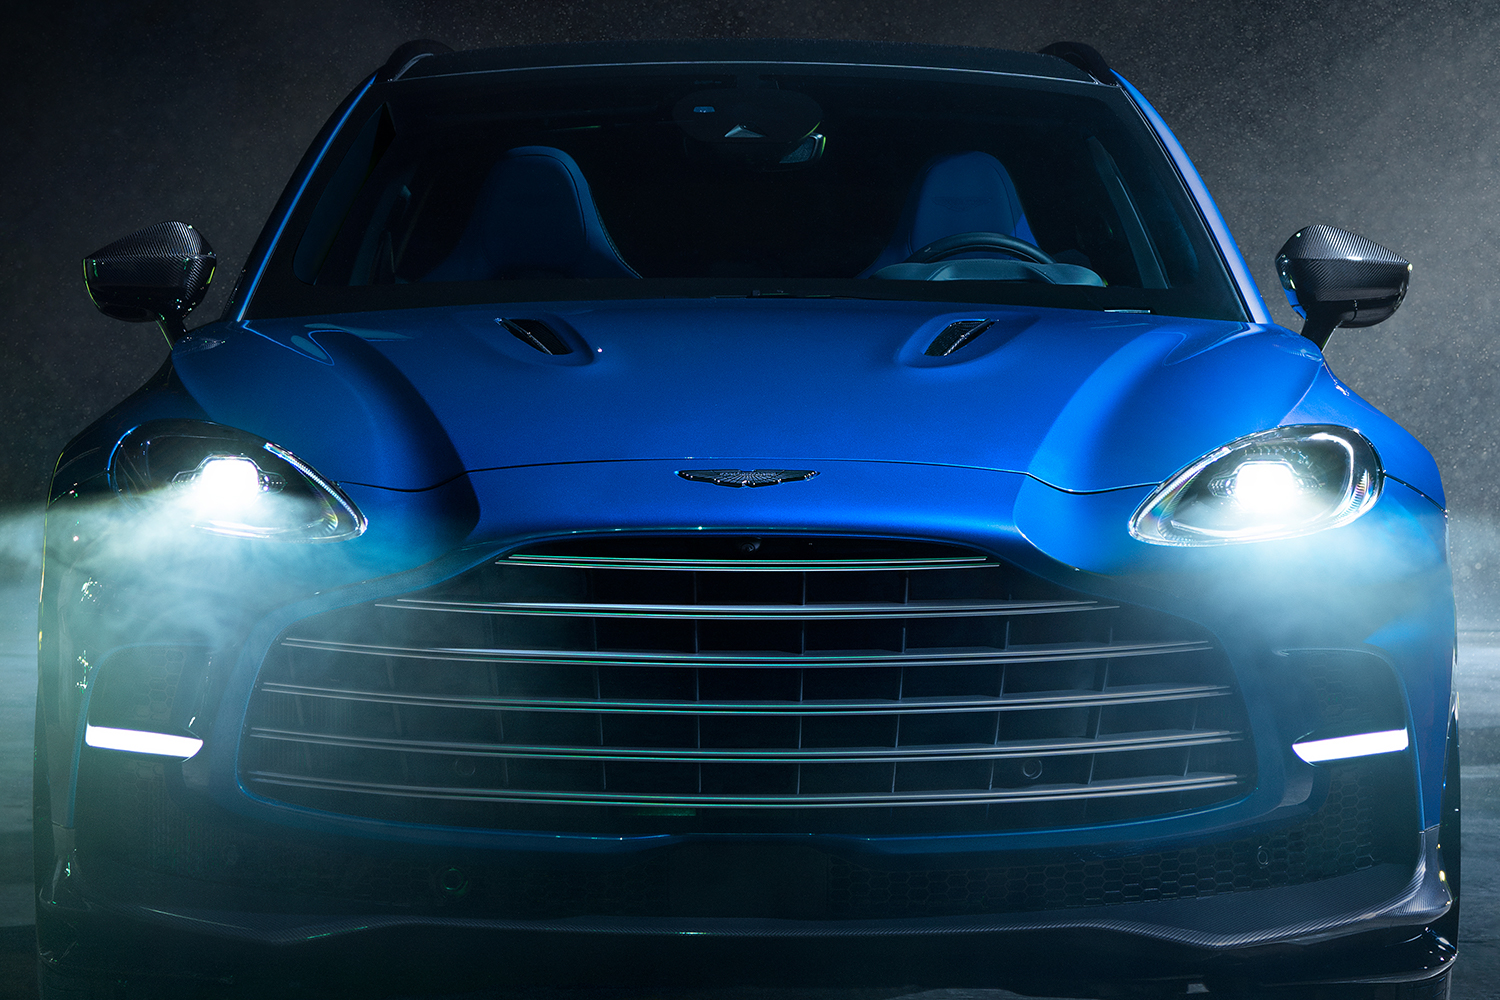 The new high-performance Aston Martin DBX707 SUV in blue with its headlights on. The SUV debuted on February 1, 2022 and will be available in Q2 this year.